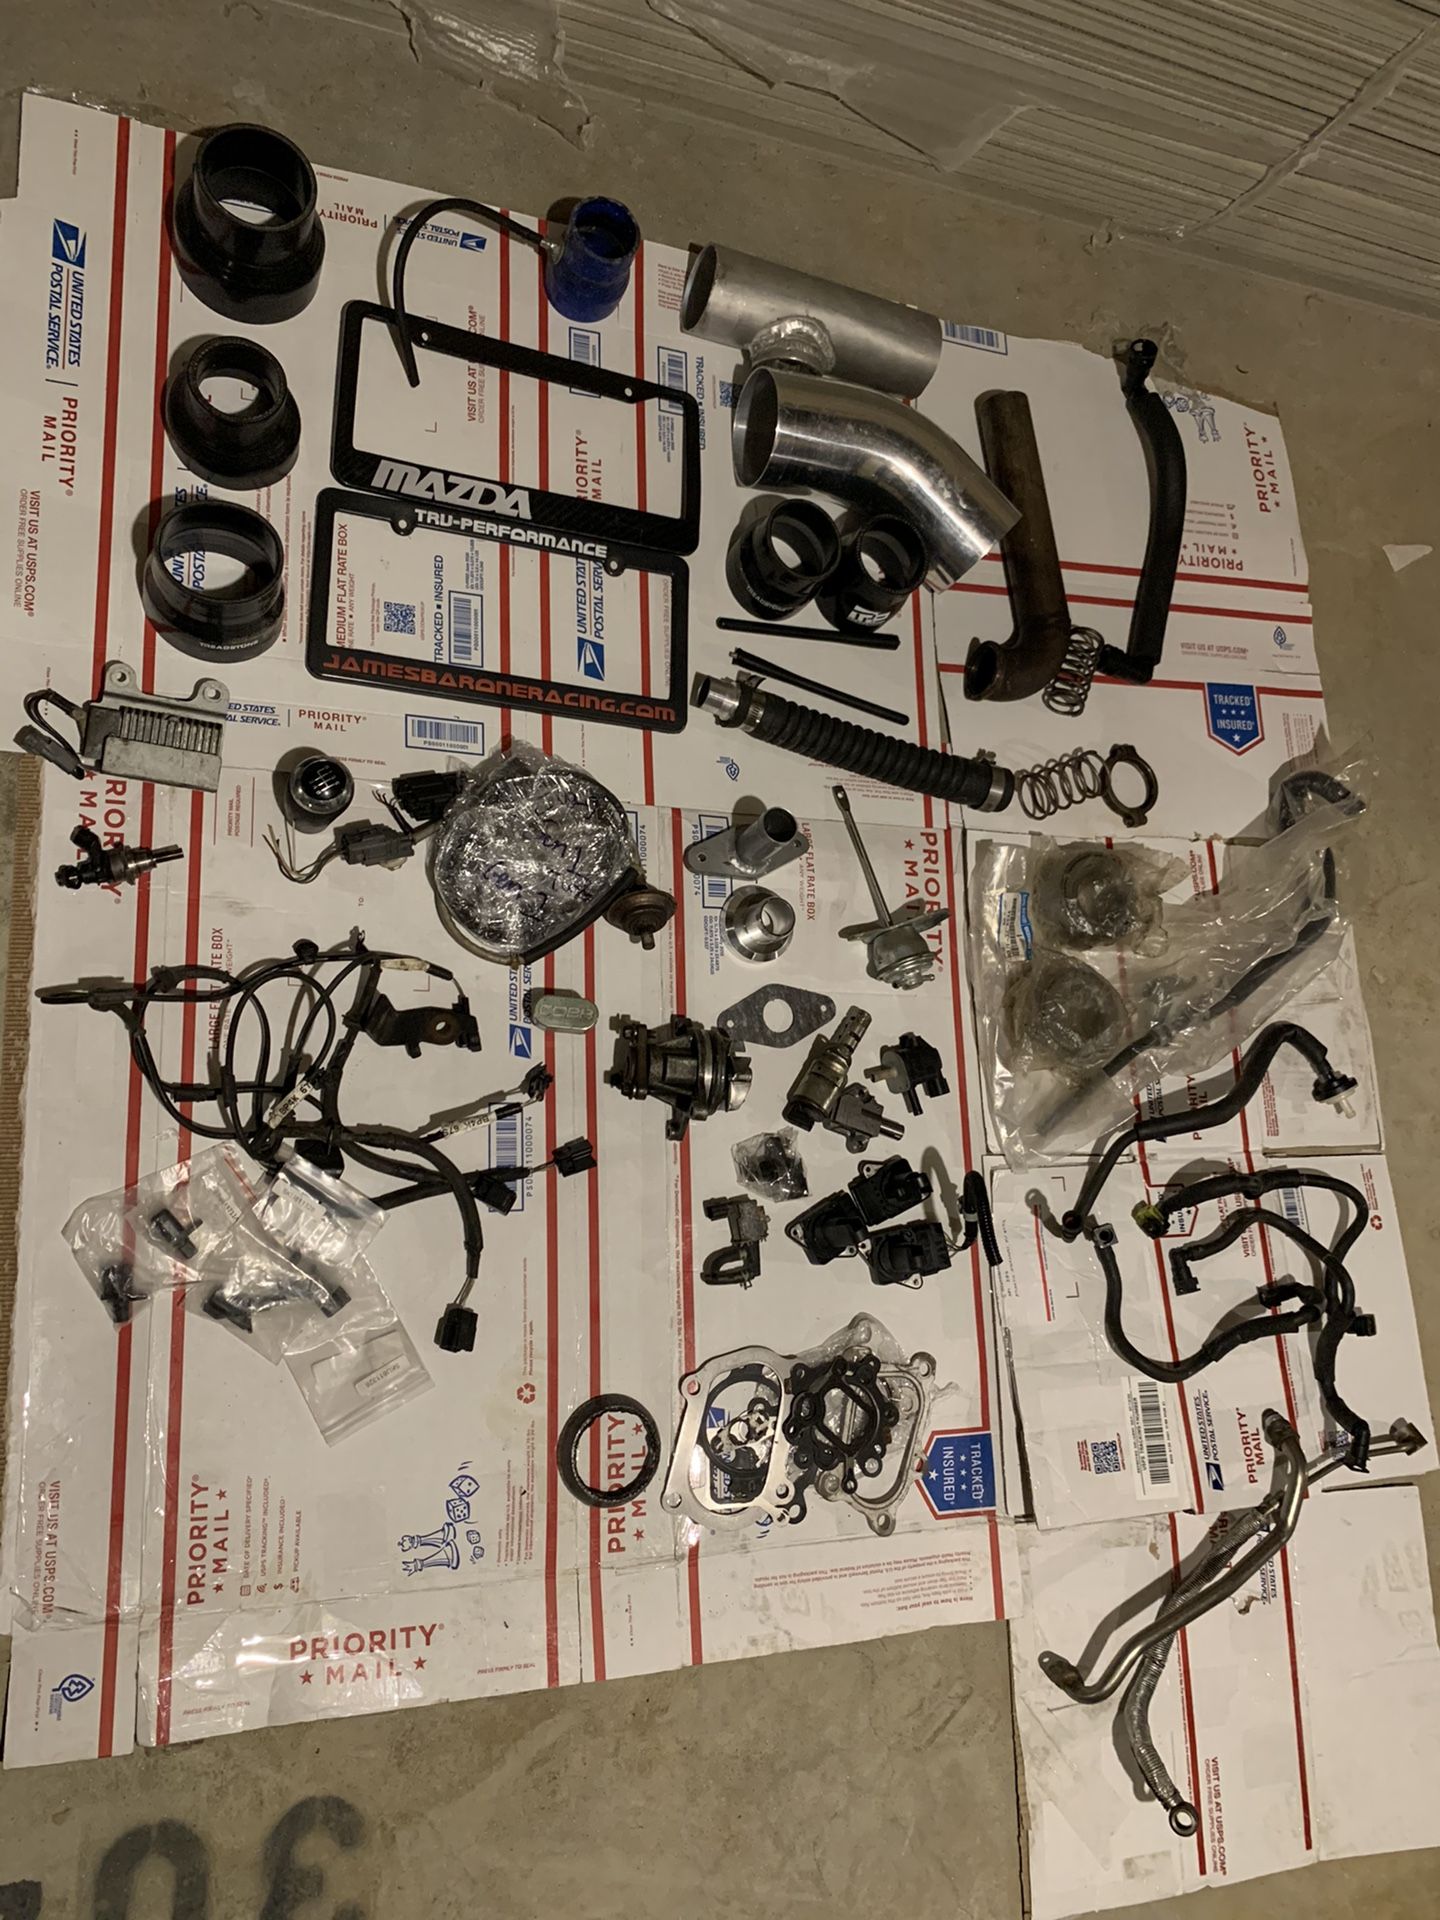 Mazdaspeed Parts for sale MZR Speed3 Speed6 partout aftermarket and oem